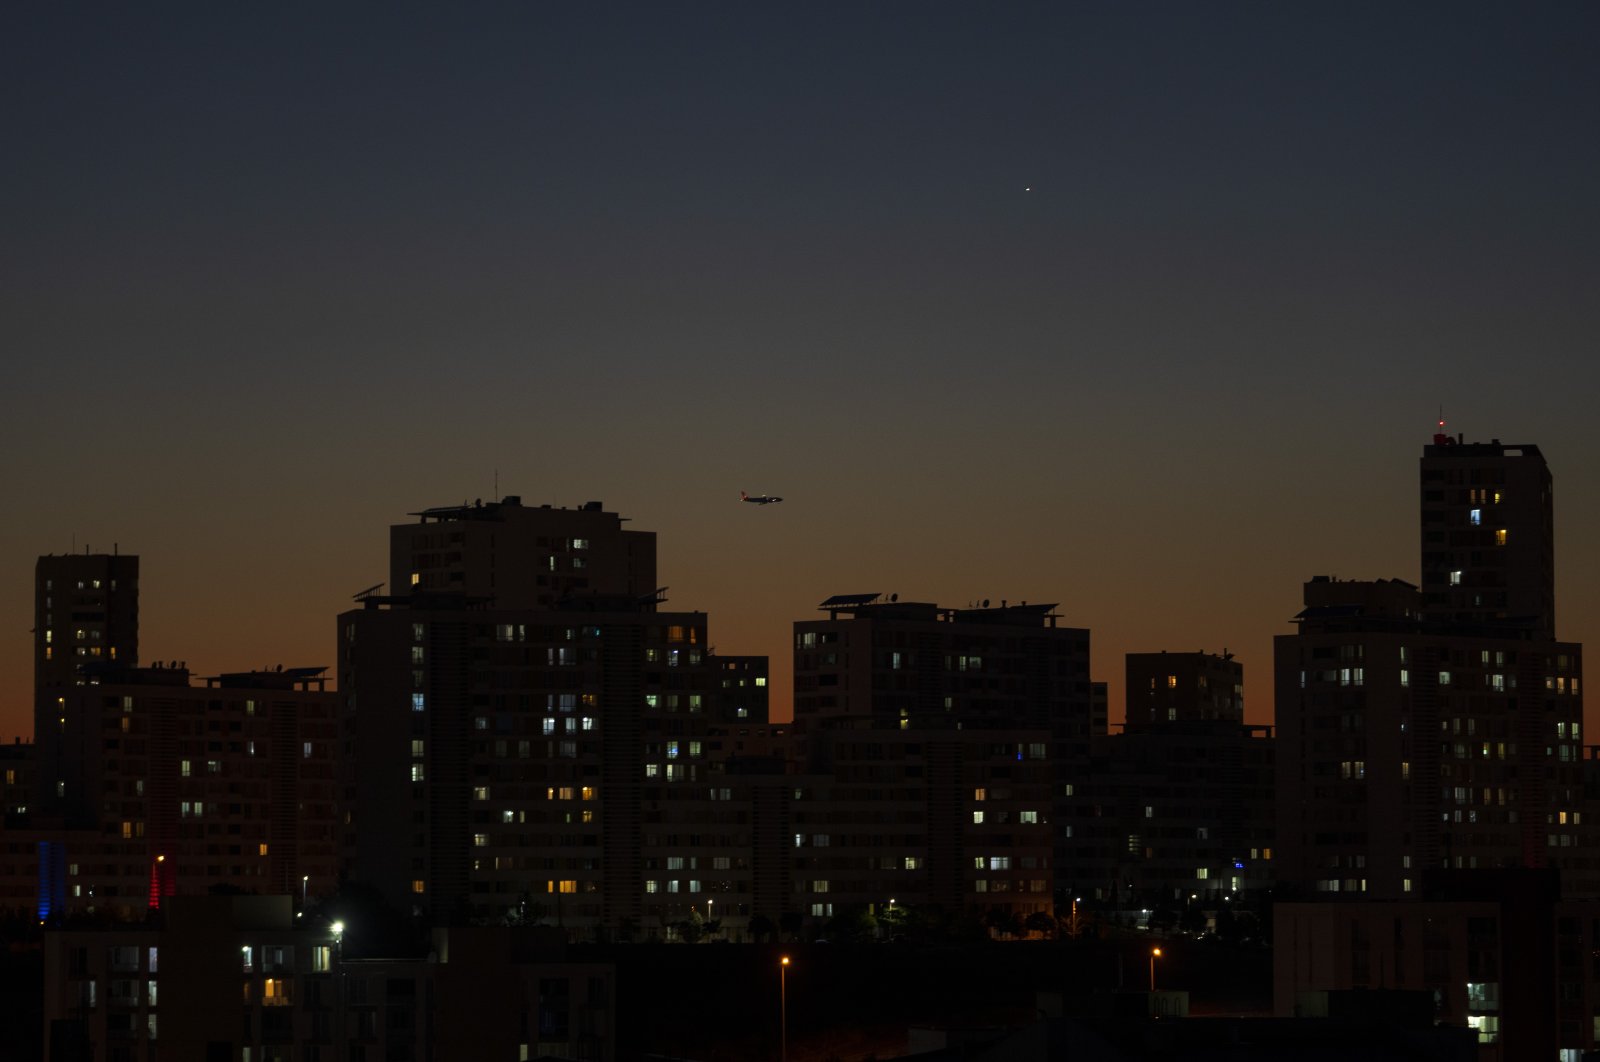 A plane flies over residential buildings during the sunset in Istanbul, Turkey, Aug. 5, 2022. (AP Photo)